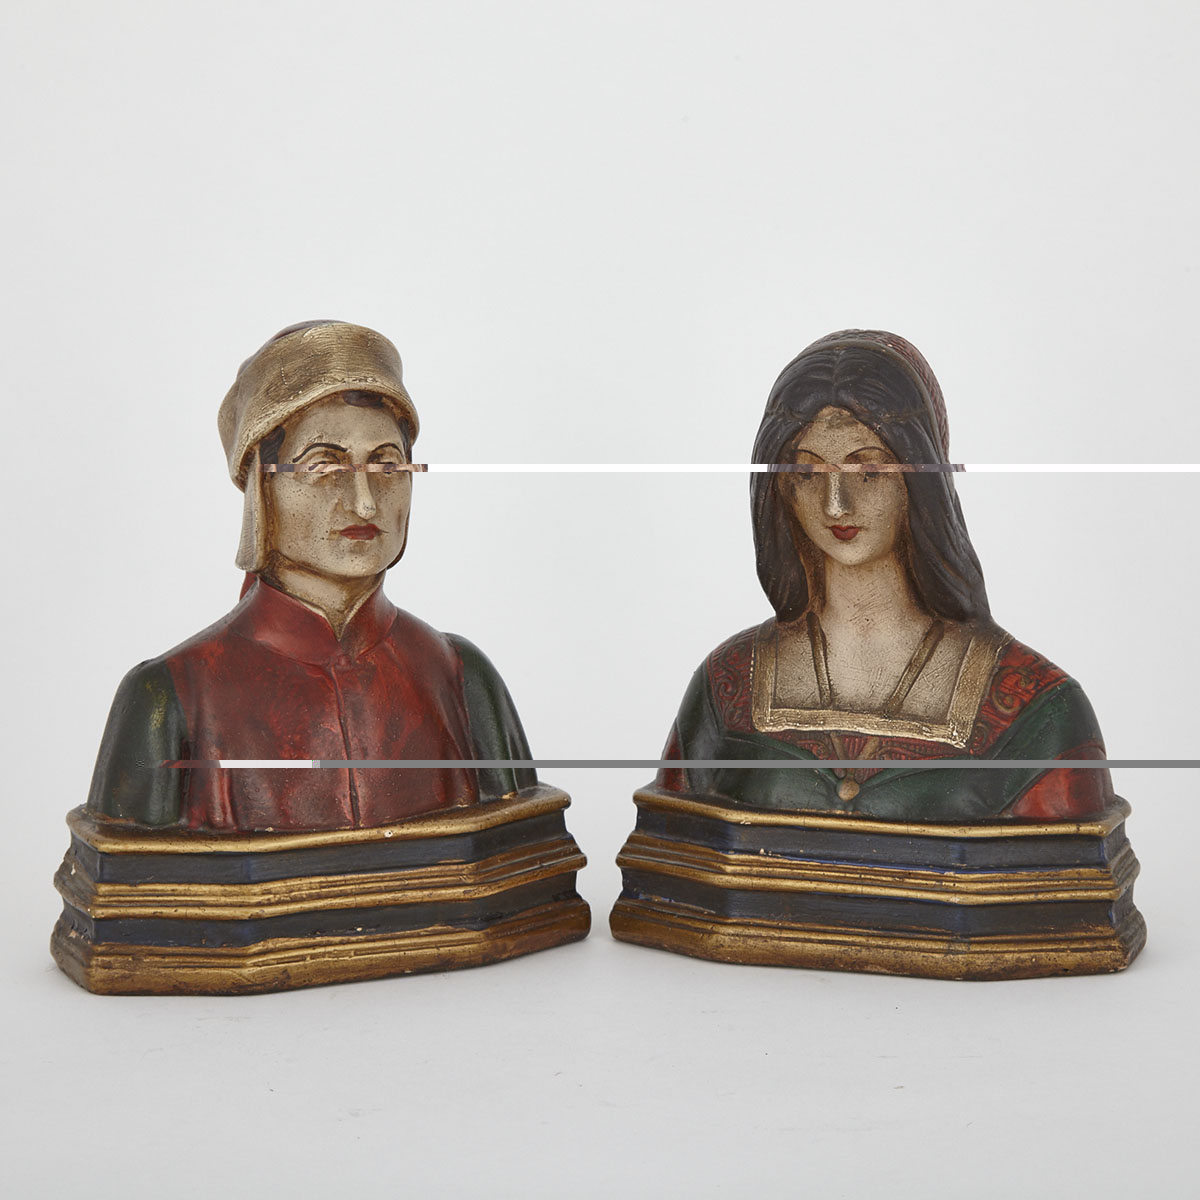 Pair of Polychromed Plaster Bust Form Bookends Modelled as Dante and Beatrice, early/mid 20th century